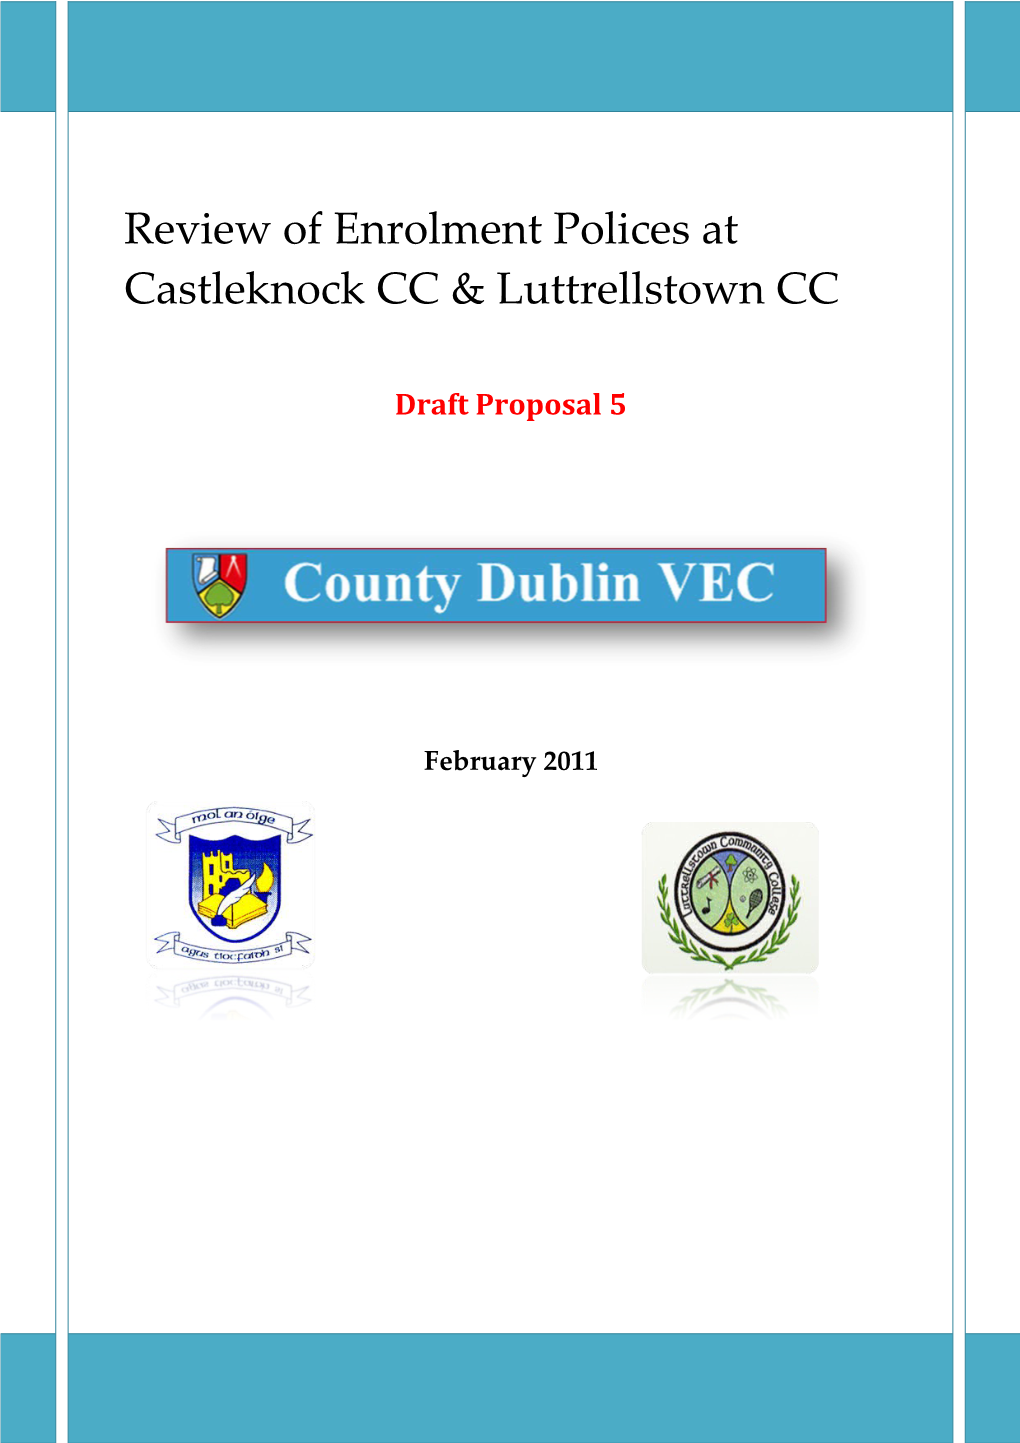 Review of Enrolment Polices at Castleknock CC & Luttrellstown CC